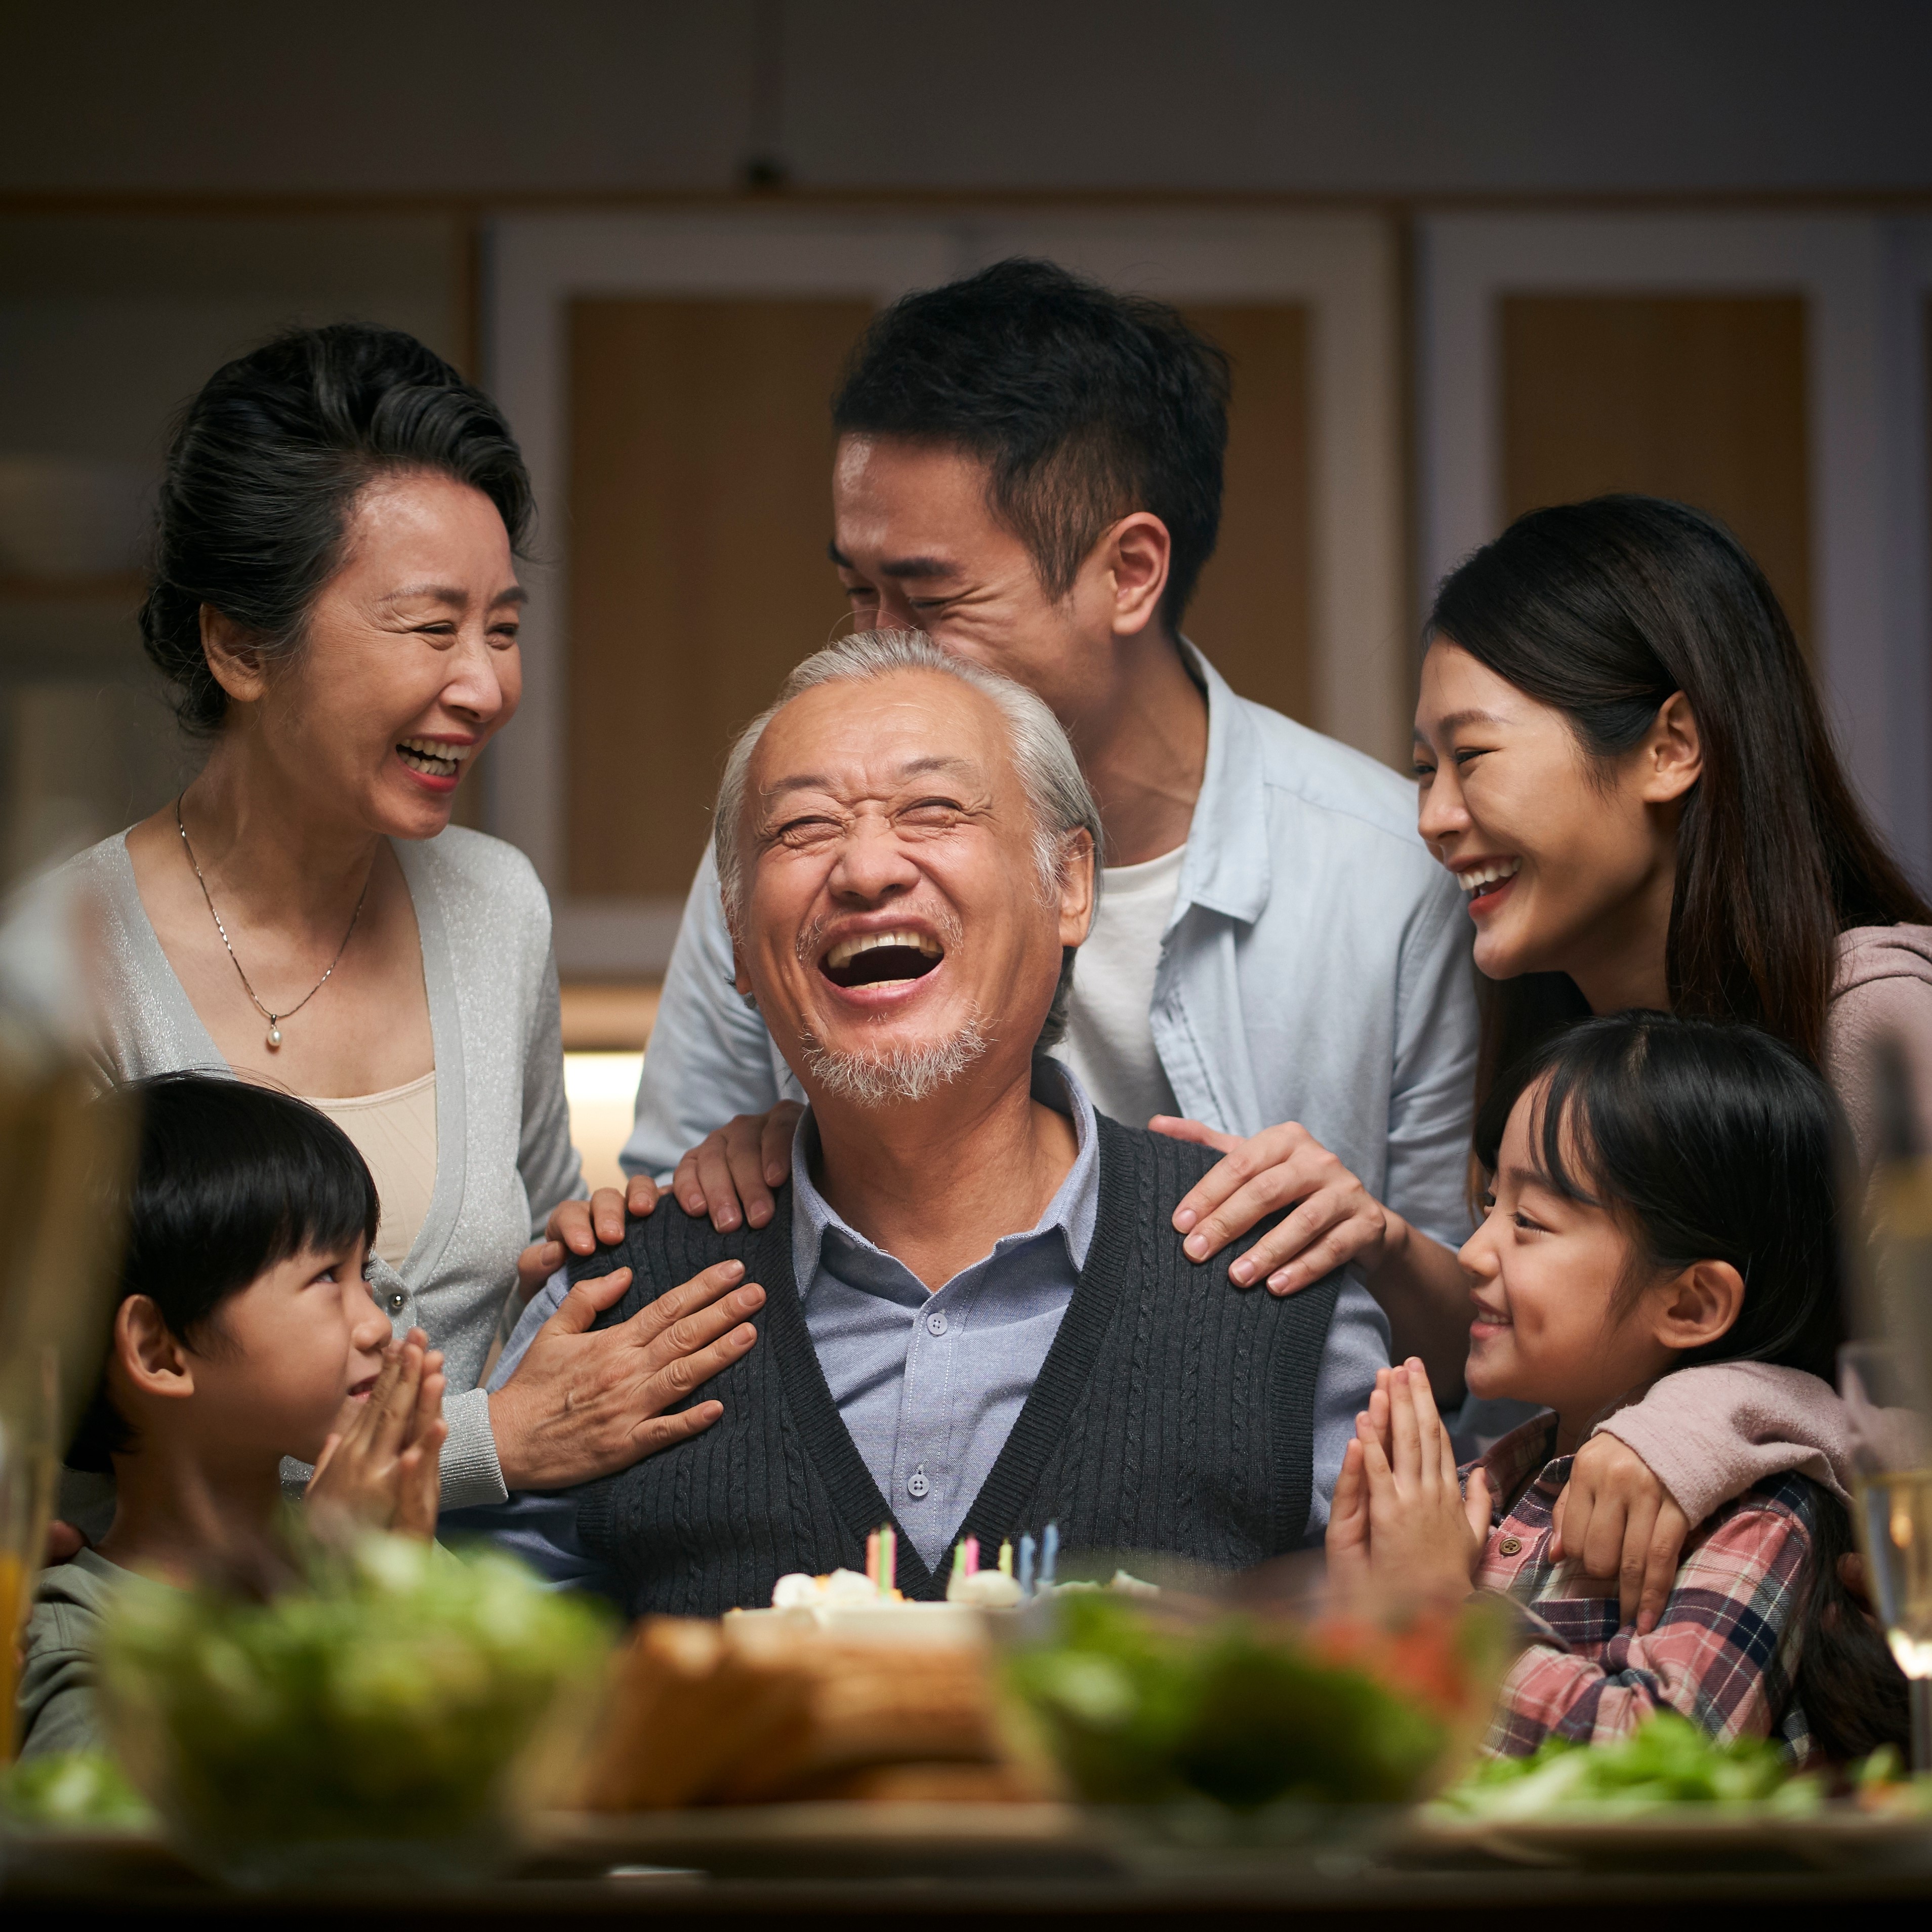 Retired man sitting at a table with a birthday cake in front of him, surrounded by his family, laughing